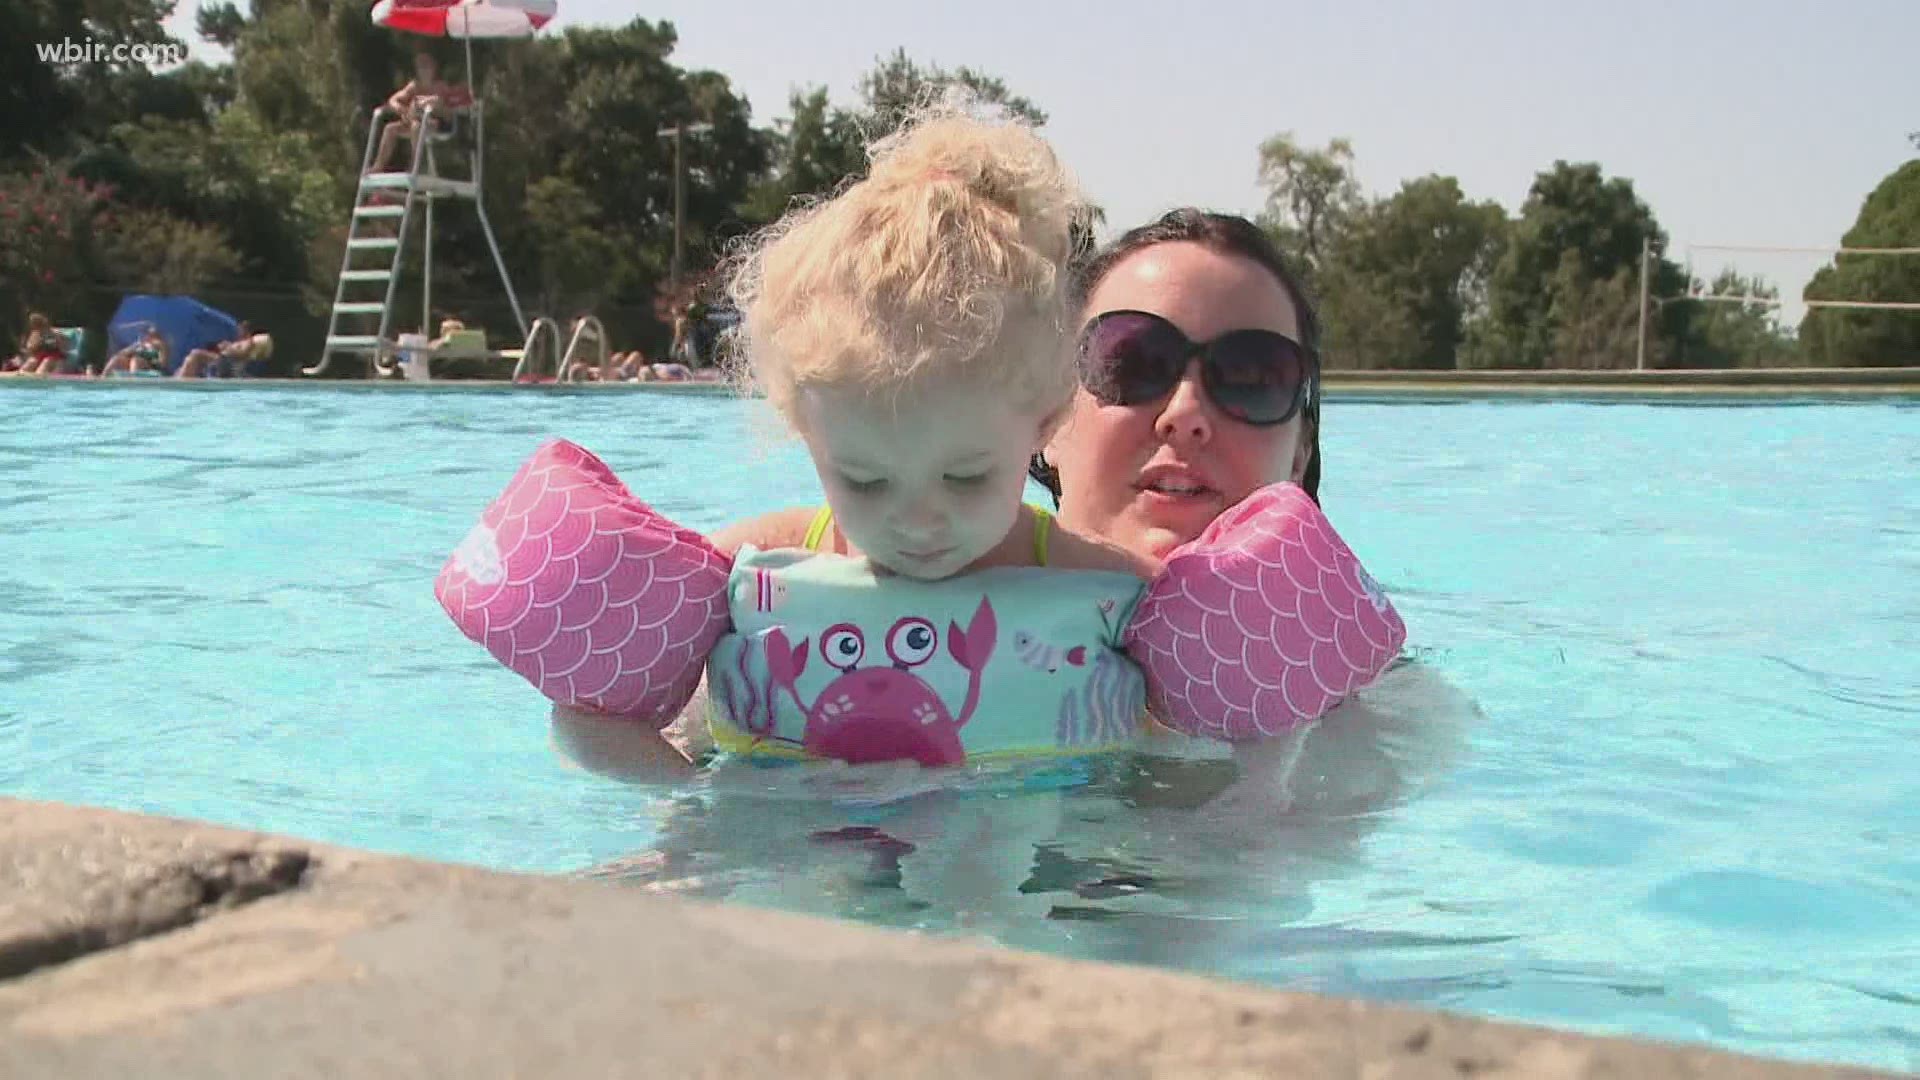 Knoxville delayed the opening of city pools earlier this summer because of the pandemic.